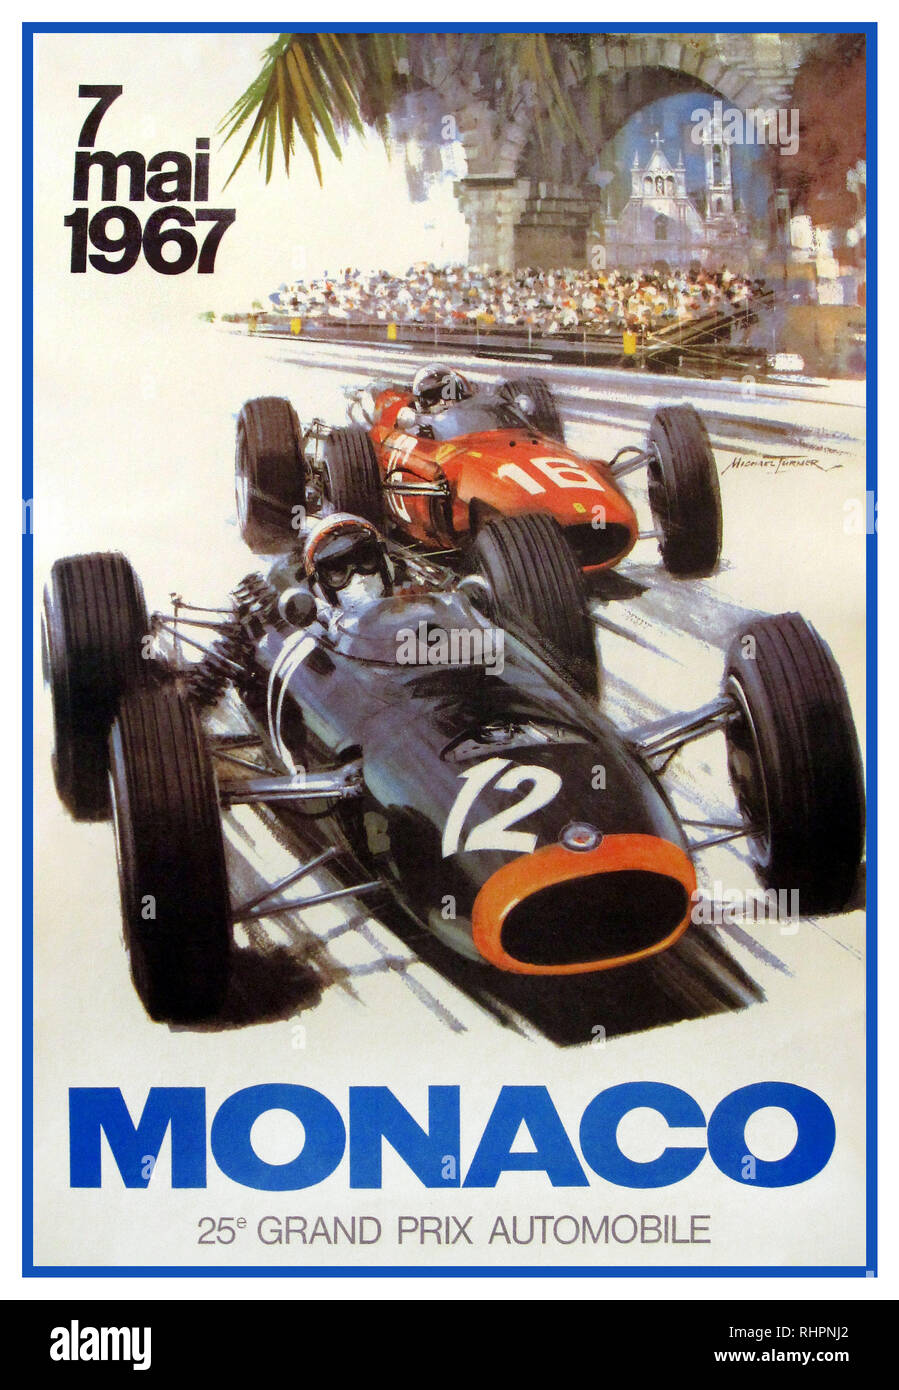 GRAND PRIX MOTOR RACING GP MONACO 7th May 1967 by Michael Turner Artist... The 100-lap race was won by Brabham driver Denny Hulme after he started from fourth position. Graham Hill finished second for the Lotus team and Ferrari driver Chris Amon came in third. (Poster illustrates Jim Clark Lotus Climax Racing with No 12 and Lorenzo Bandini Ferrari with No 18) Stock Photo